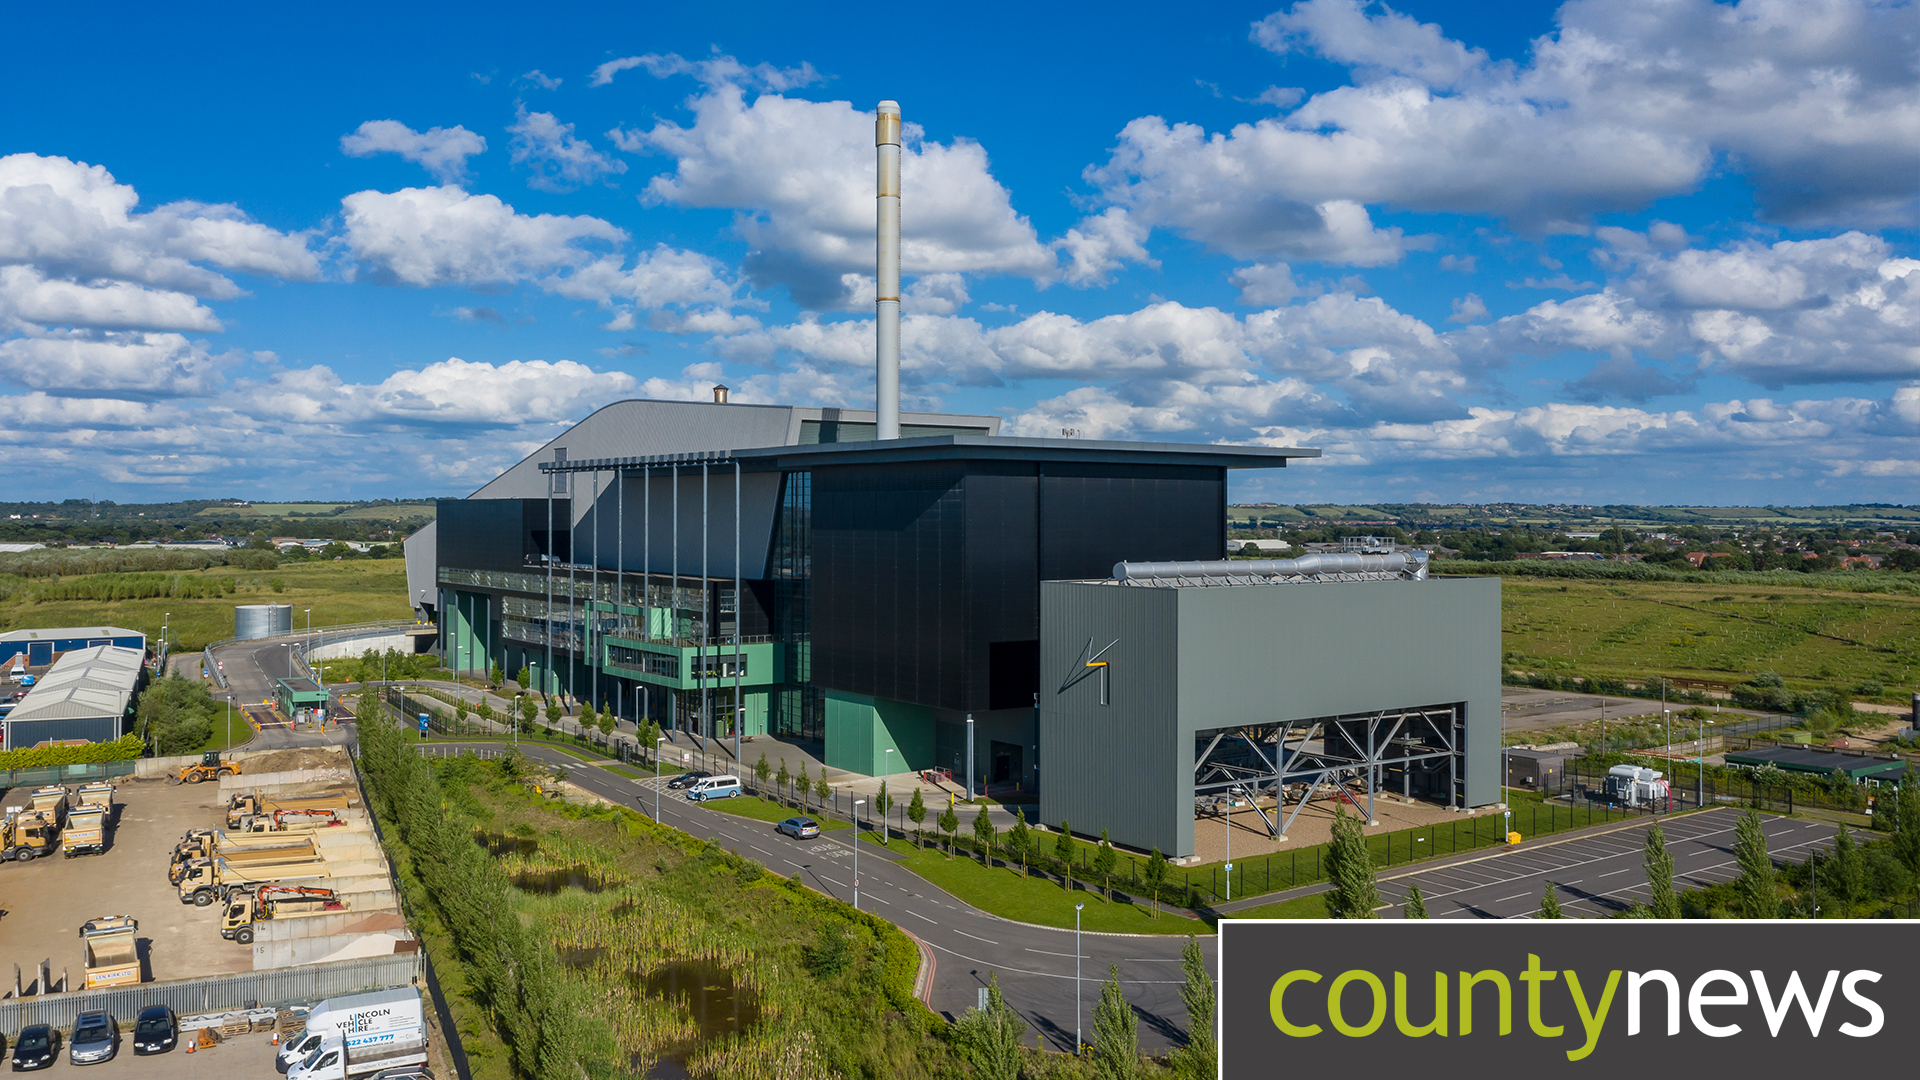 Lincolnshire's Energy from Waste plant